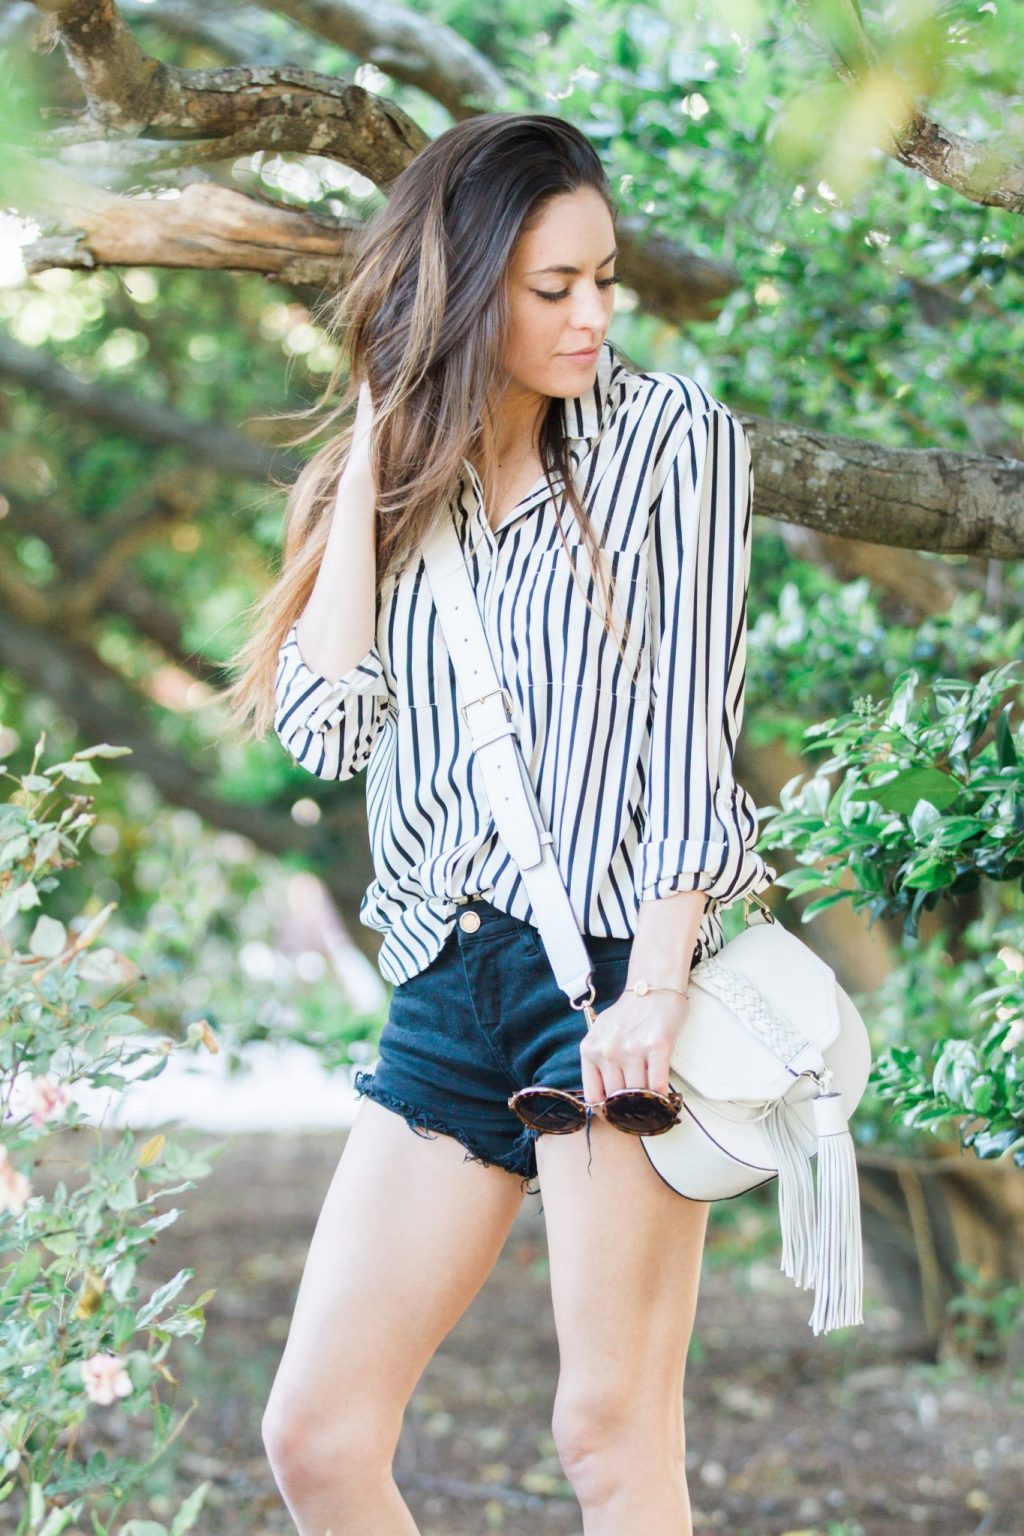 vertical stripes, black and white outfit ideas, how to wear black and white in the summer, spring neutrals, summer neutrals, white rebecca minkoff isobel saddle bag in white, casual spring outfit ideas, casual summer outfit ideas, simple summer style